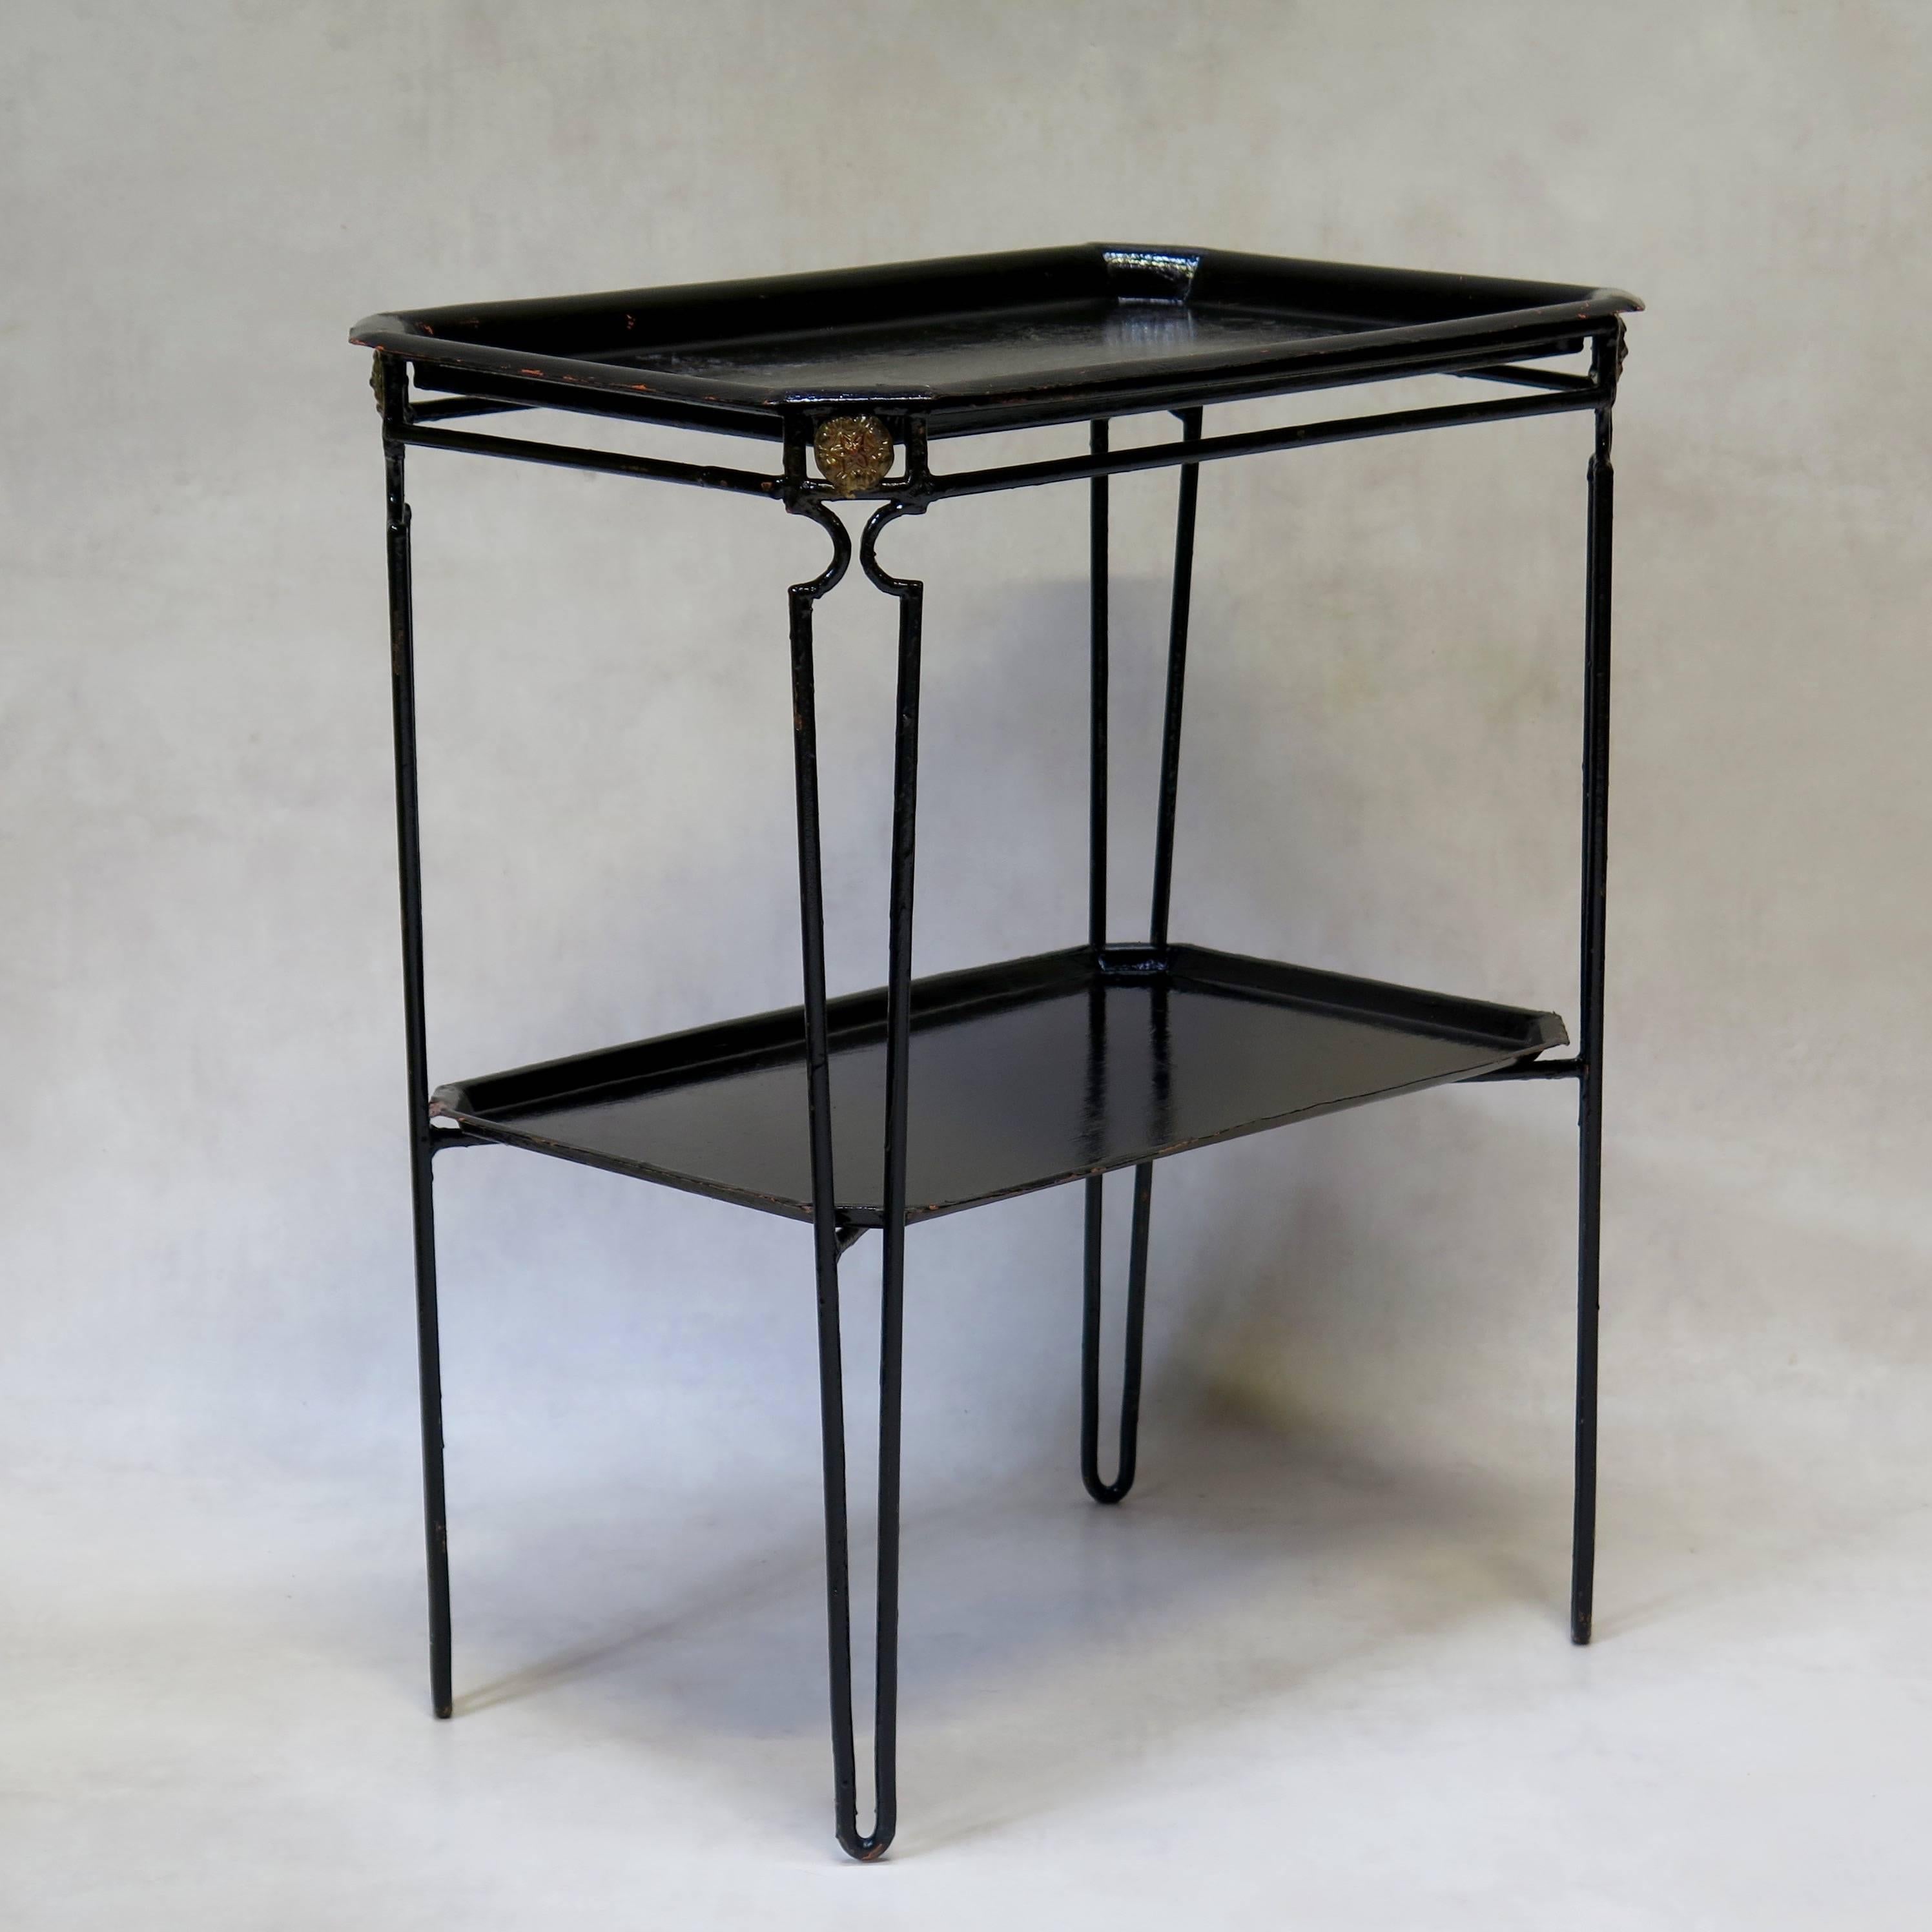 Neoclassical style set of four metal tray tables painted glossy black with traces of orange primer visible beneath. 
The two highest side tables have removable trays (top and bottom). They end in slightly different feet.
The larger and lower